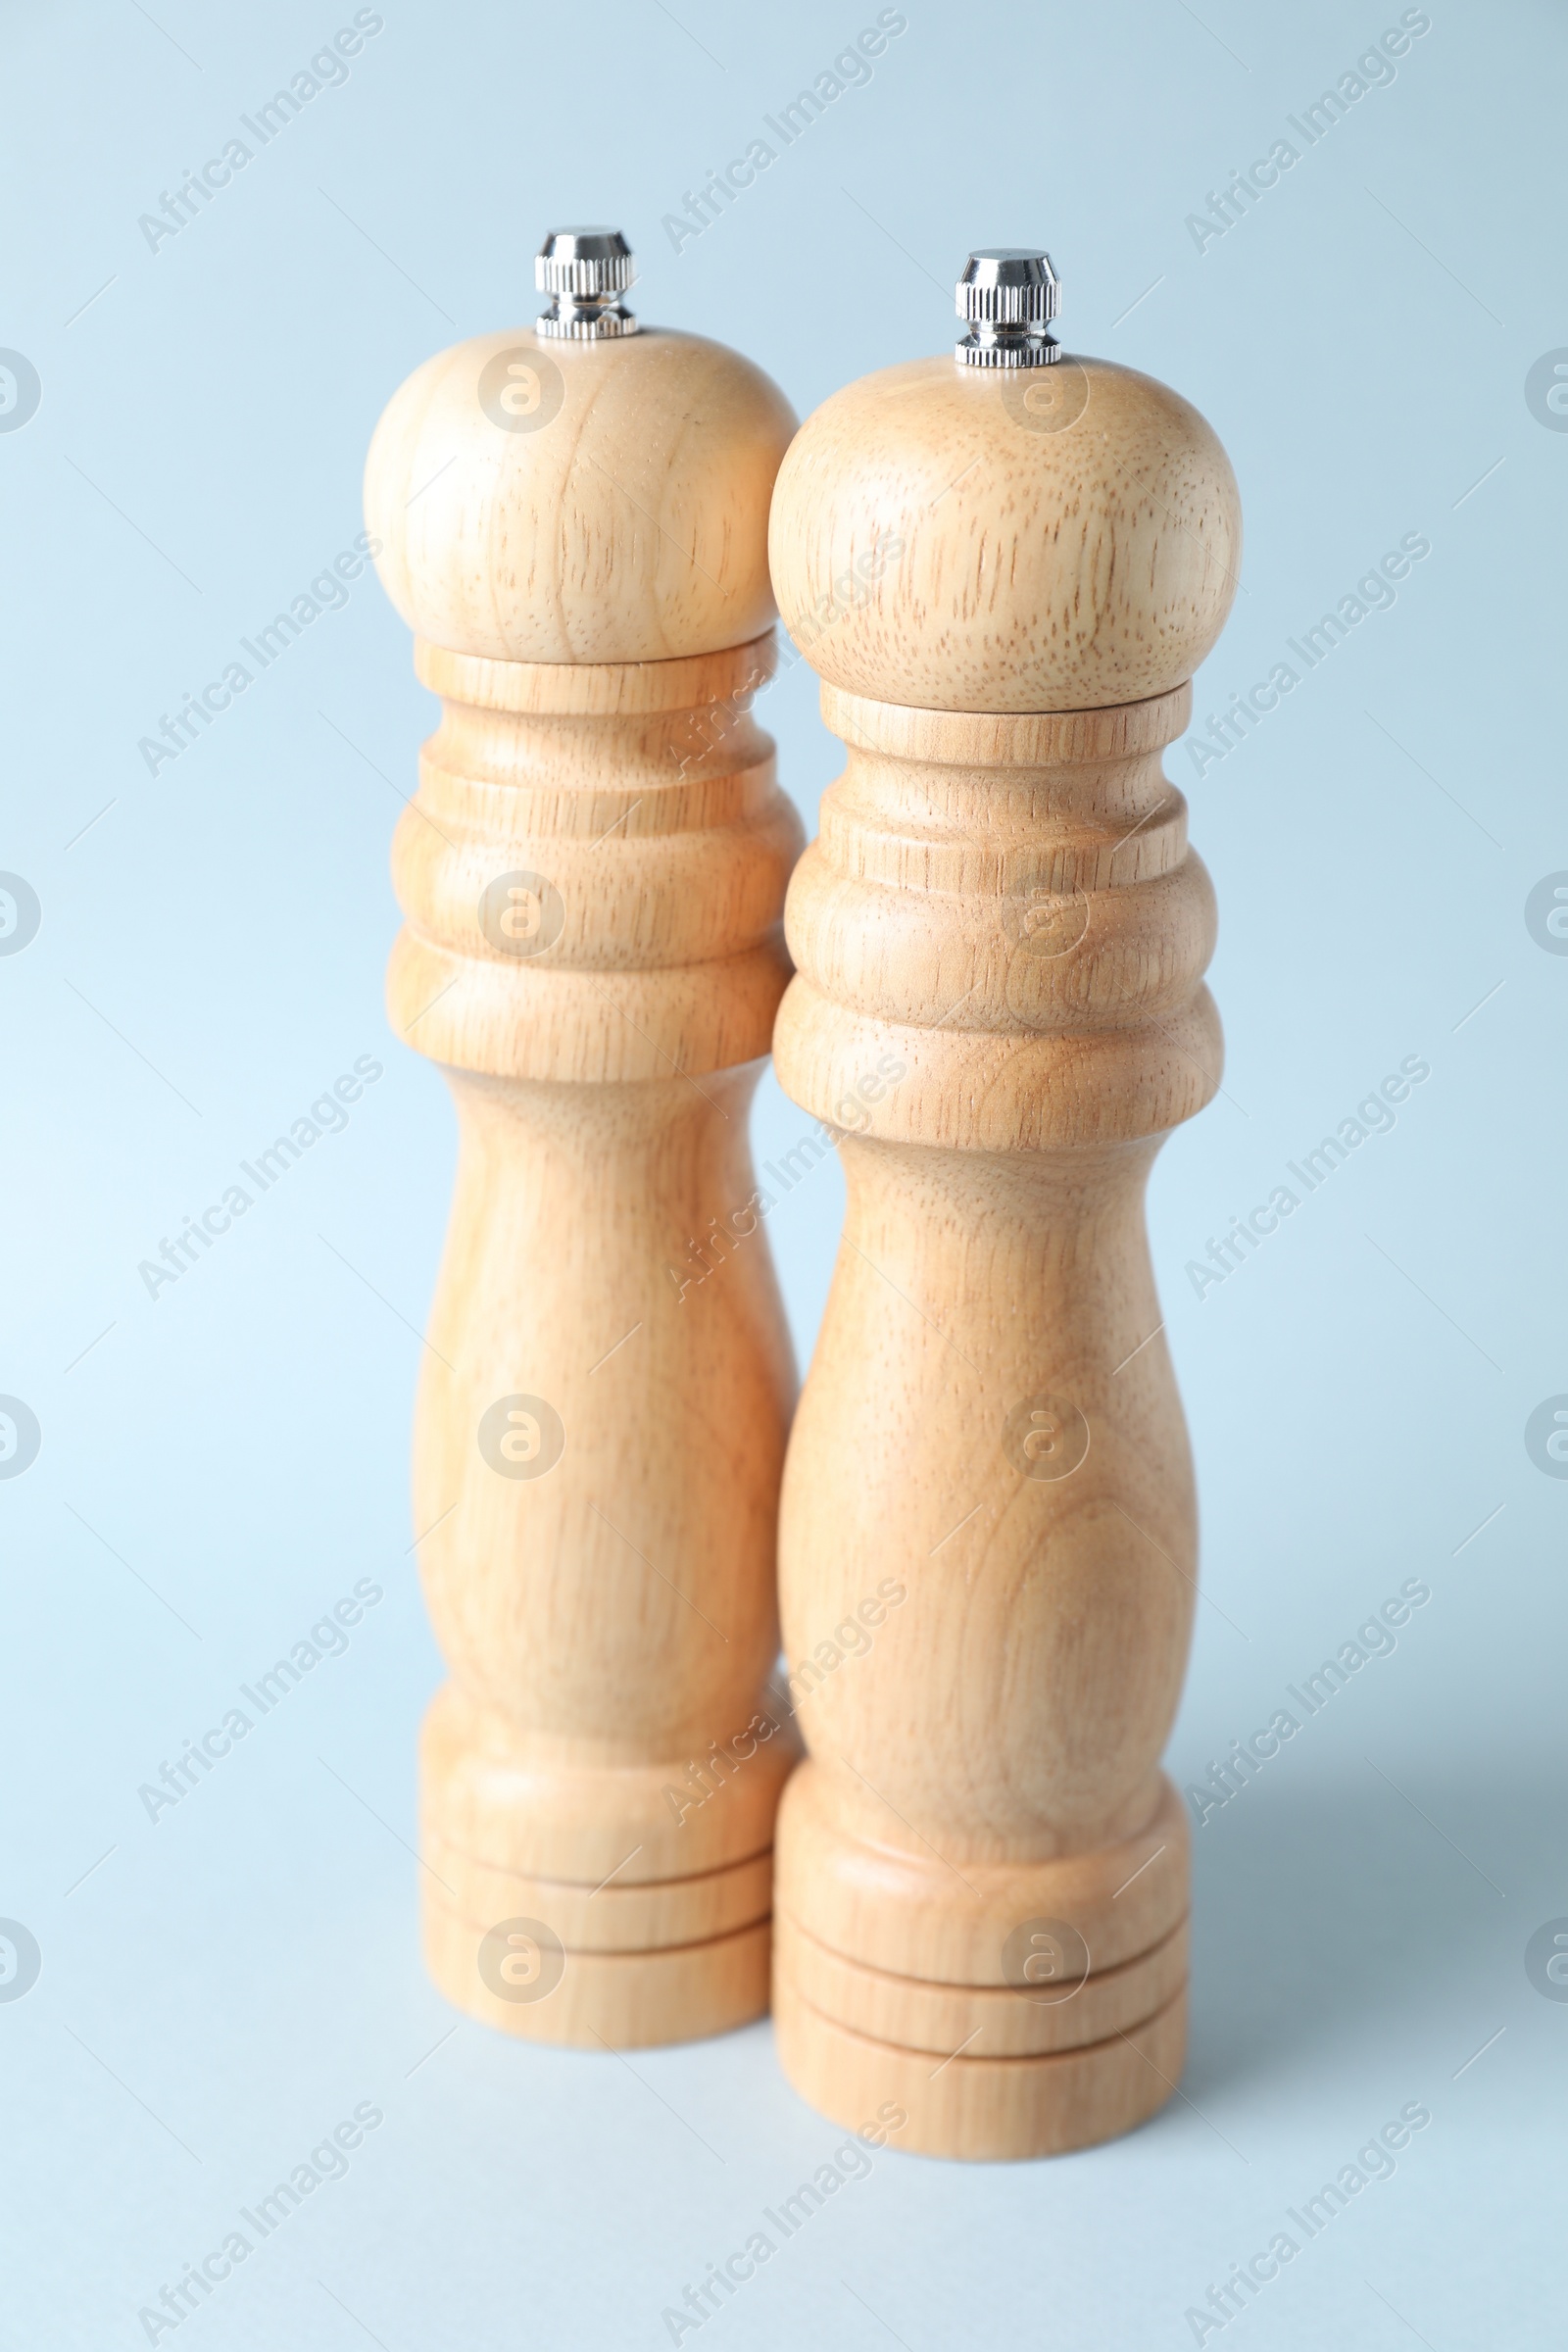 Photo of Wooden salt and pepper shakers on light background